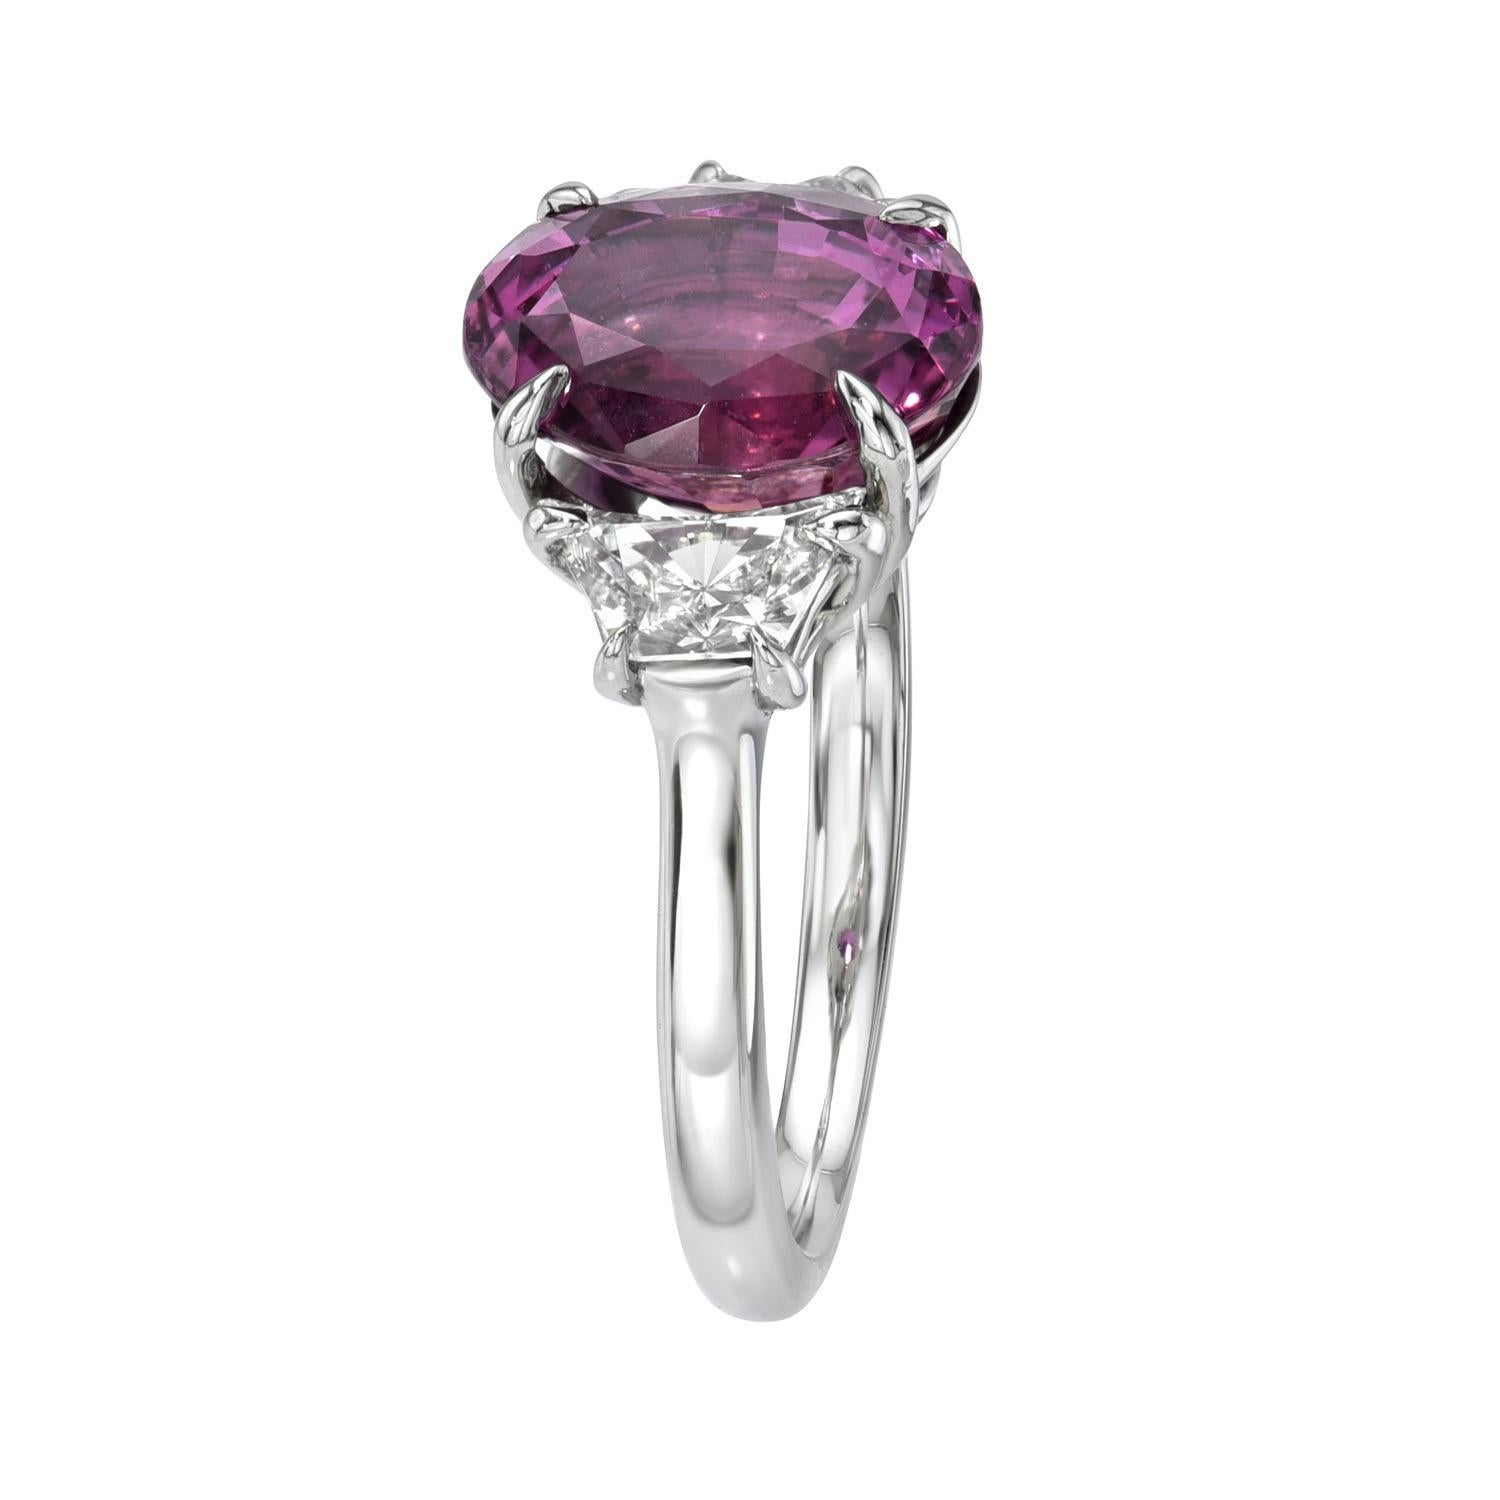 Spectacular 4.08 carat natural, unheated Purplish Pink Sapphire oval, three stone platinum ring, flanked by a pair of 0.60 carat, F/VS2-SI1 Crescent Trapezoid diamonds.
Ring size 6. Resizing is complementary upon request.
A GIA gem certificate will